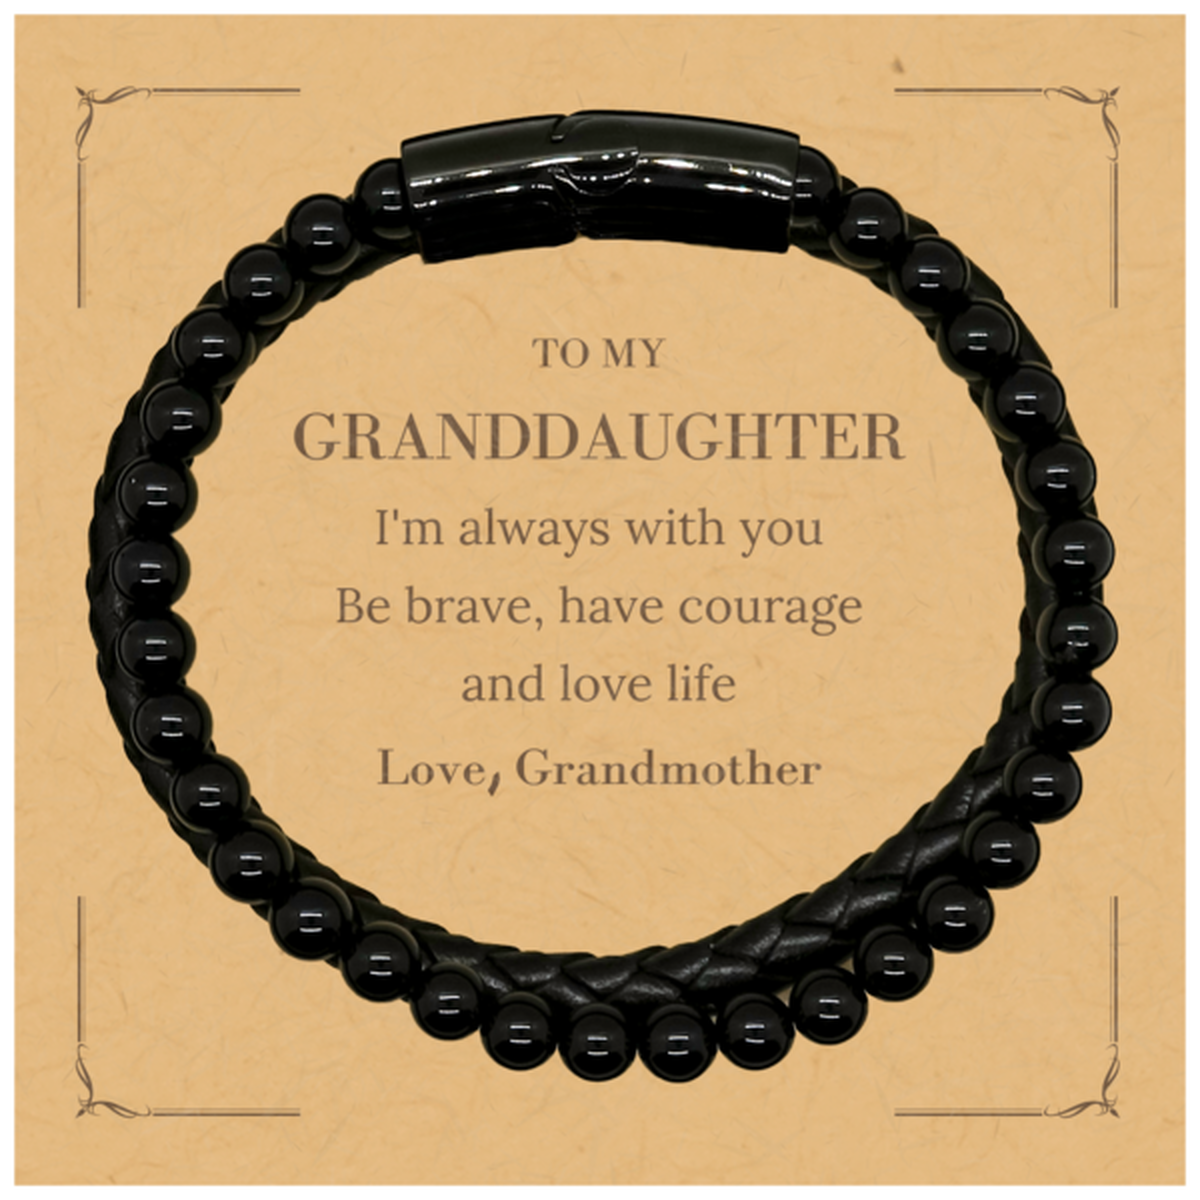 To My Granddaughter Gifts from Grandmother, Unique Stone Leather Bracelets Inspirational Christmas Birthday Graduation Gifts for Granddaughter I'm always with you. Be brave, have courage and love life. Love, Grandmother